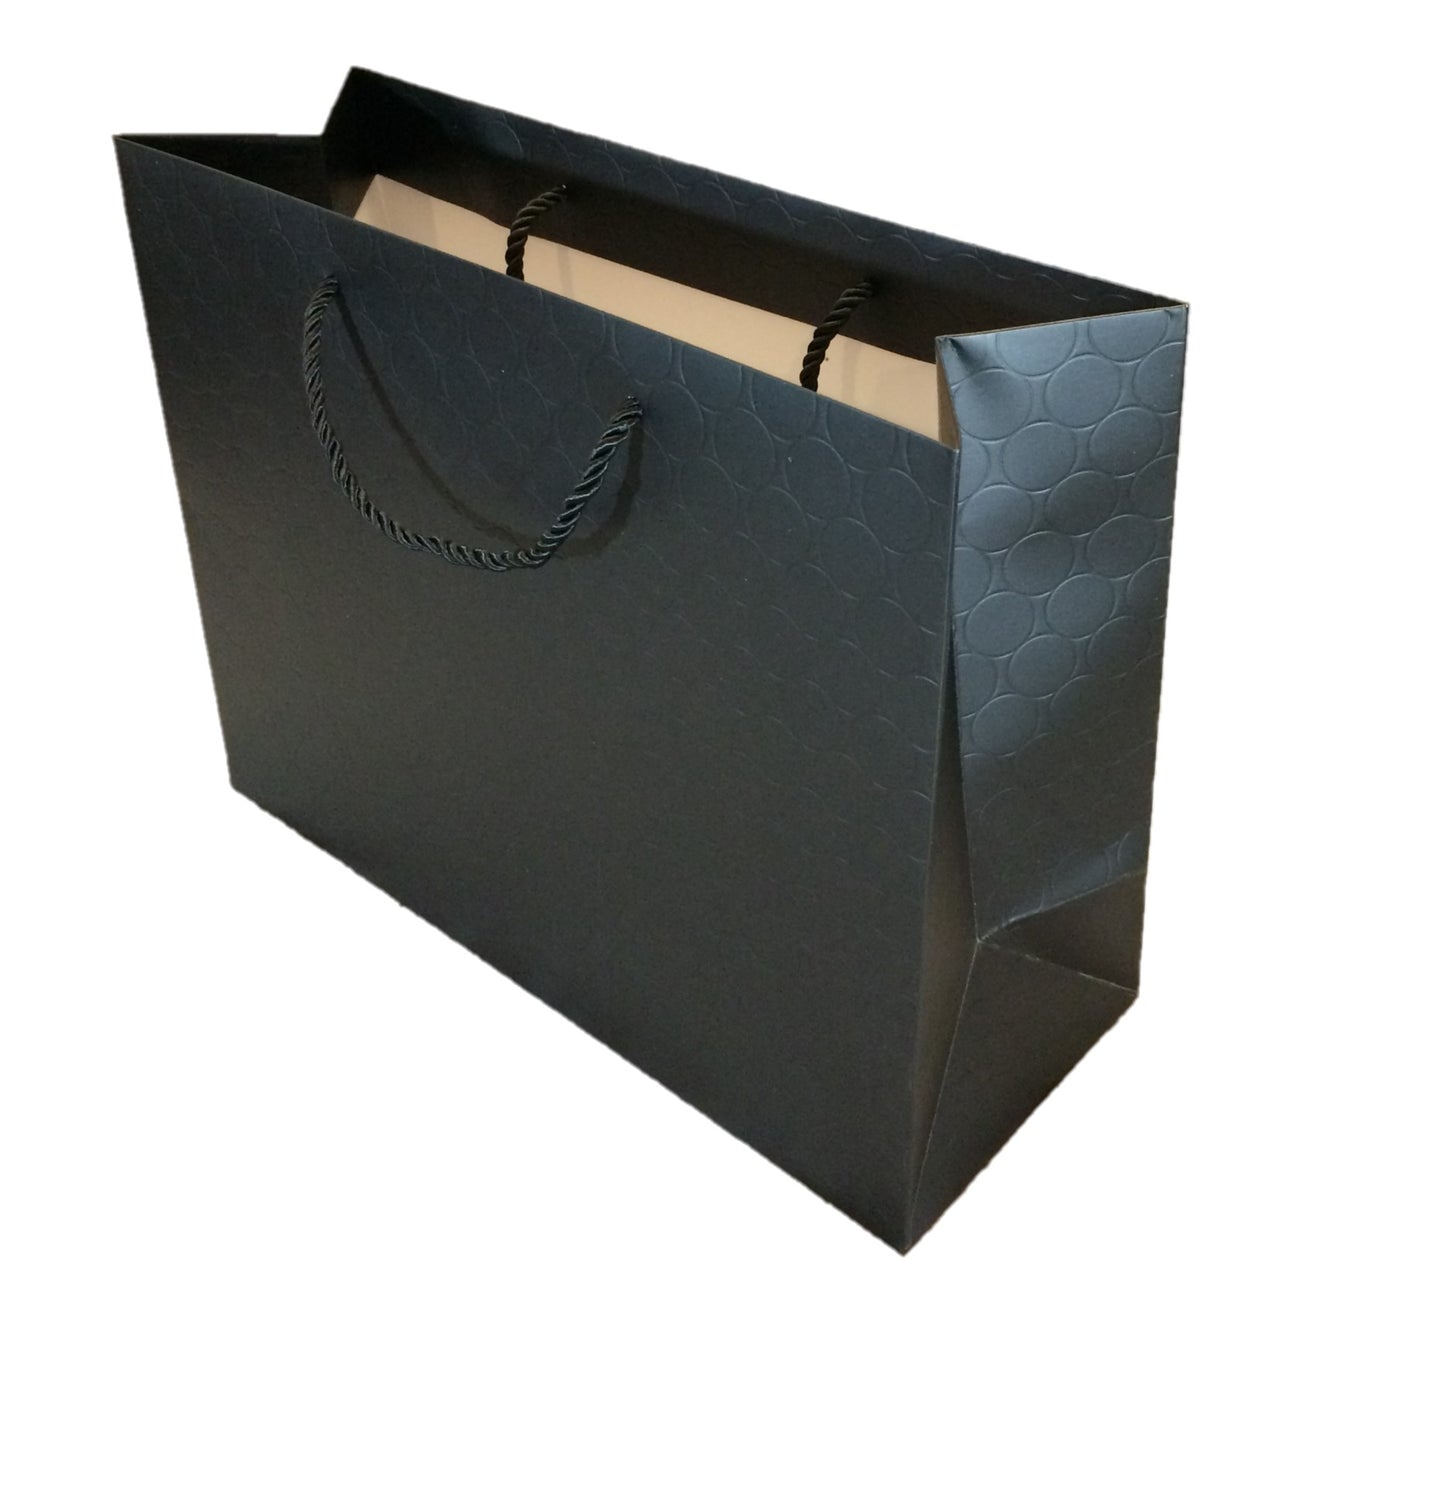 12 Large Black Gift Bags with Handles 13x10 Luxury Heavy Duty Paper Shopping Bag 13x5x10 Premium Elegant Matte Modern Embossed for Retail Merchandise Clothing Boutique Wedding Bridal Baby Shower